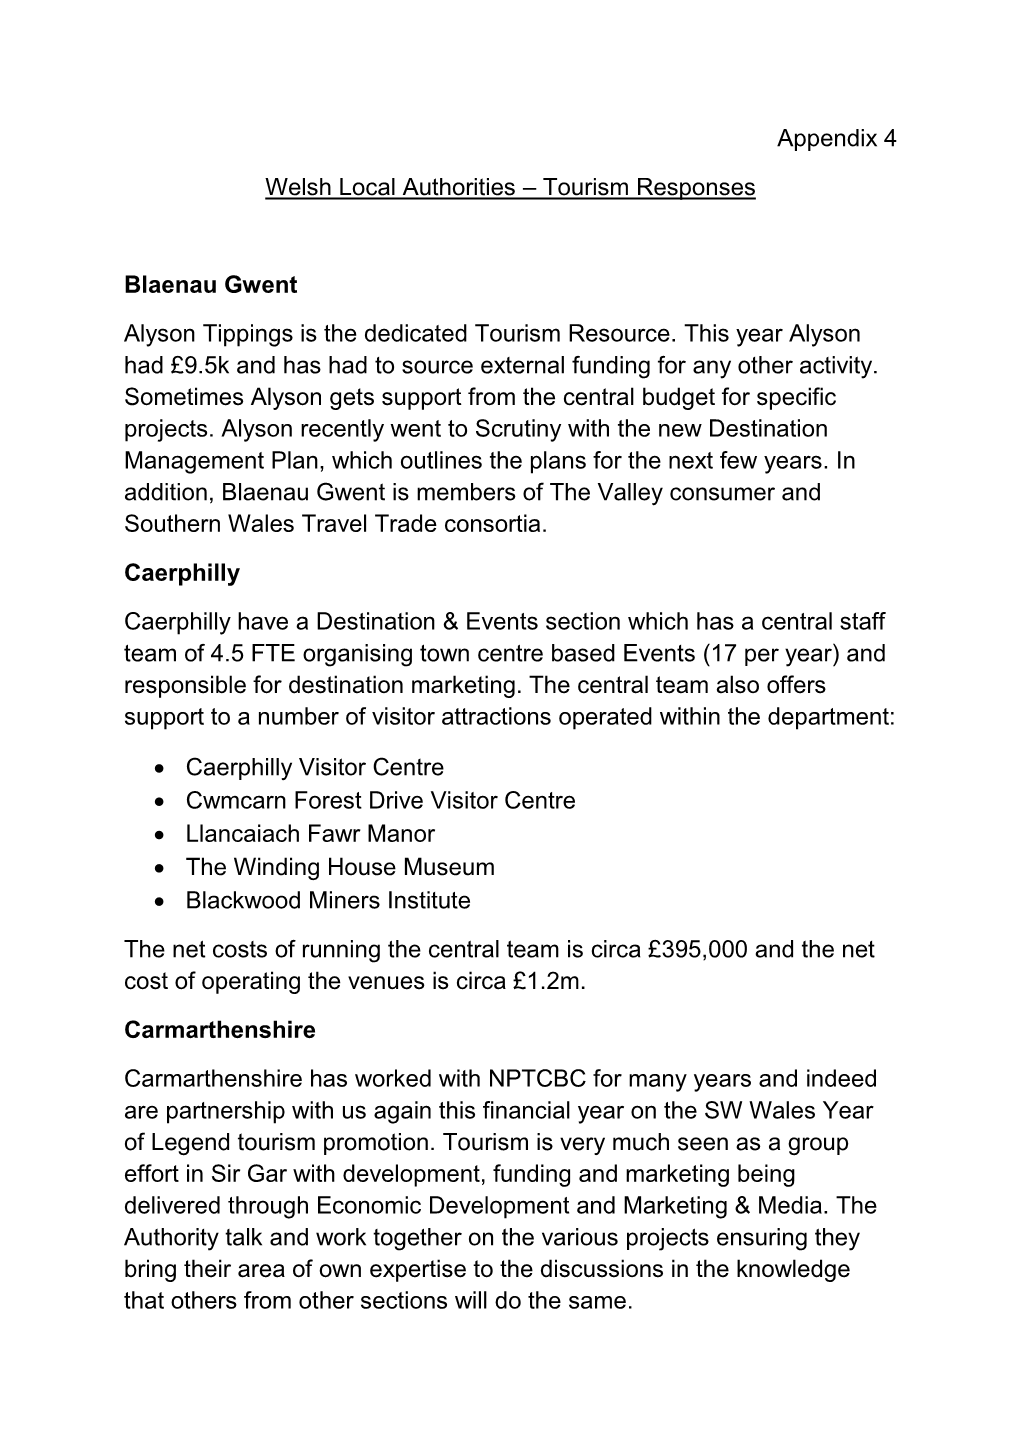 Appendix 4 Welsh Local Authorities – Tourism Responses Blaenau Gwent Alyson Tippings Is the Dedicated Tourism Resource. This